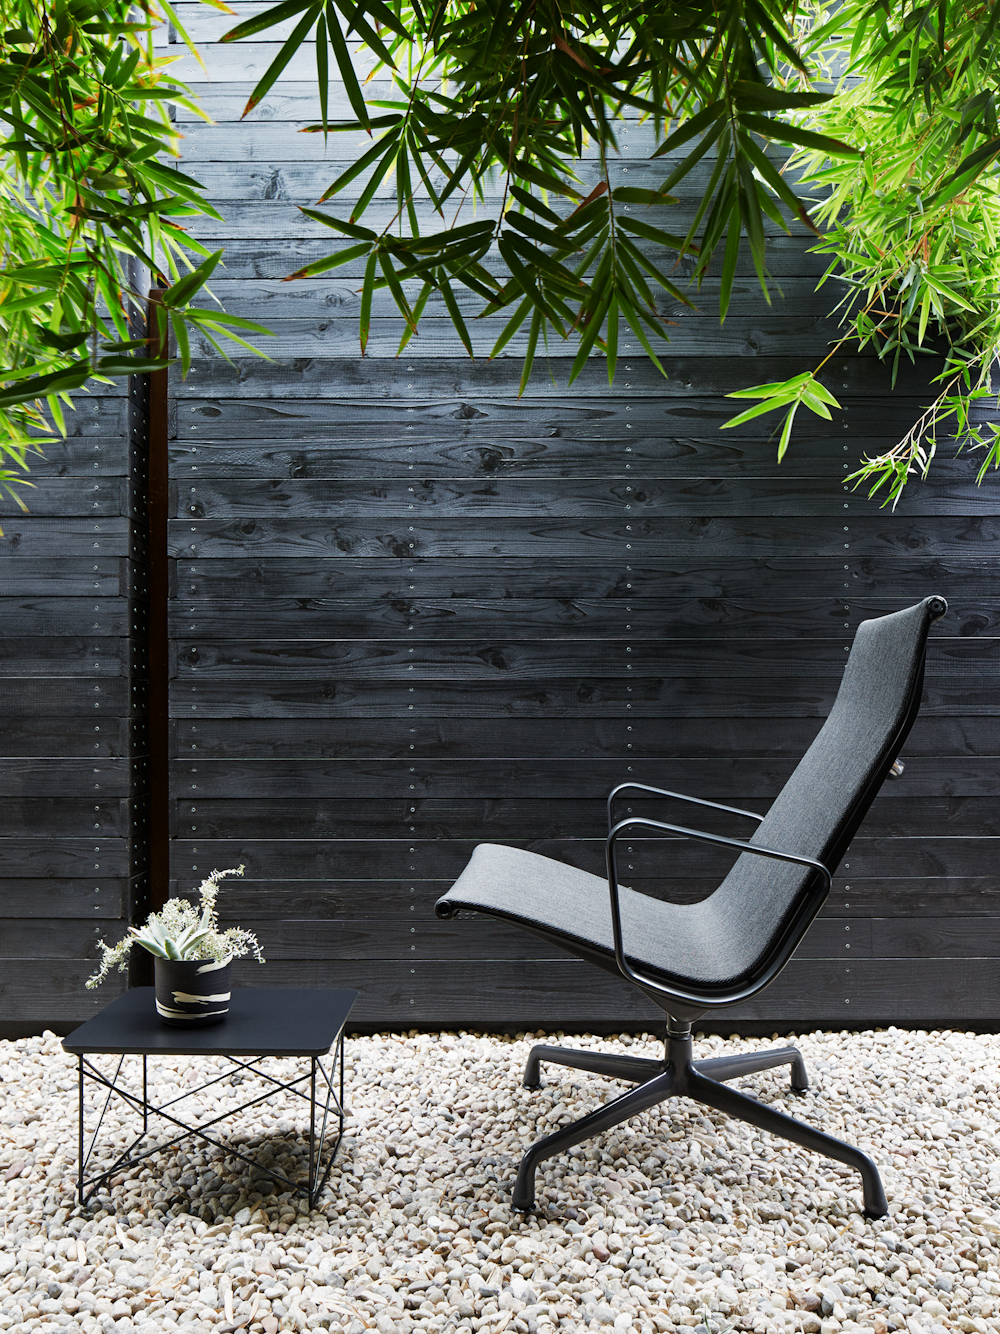 Eames Aluminum Group Chair outdoor